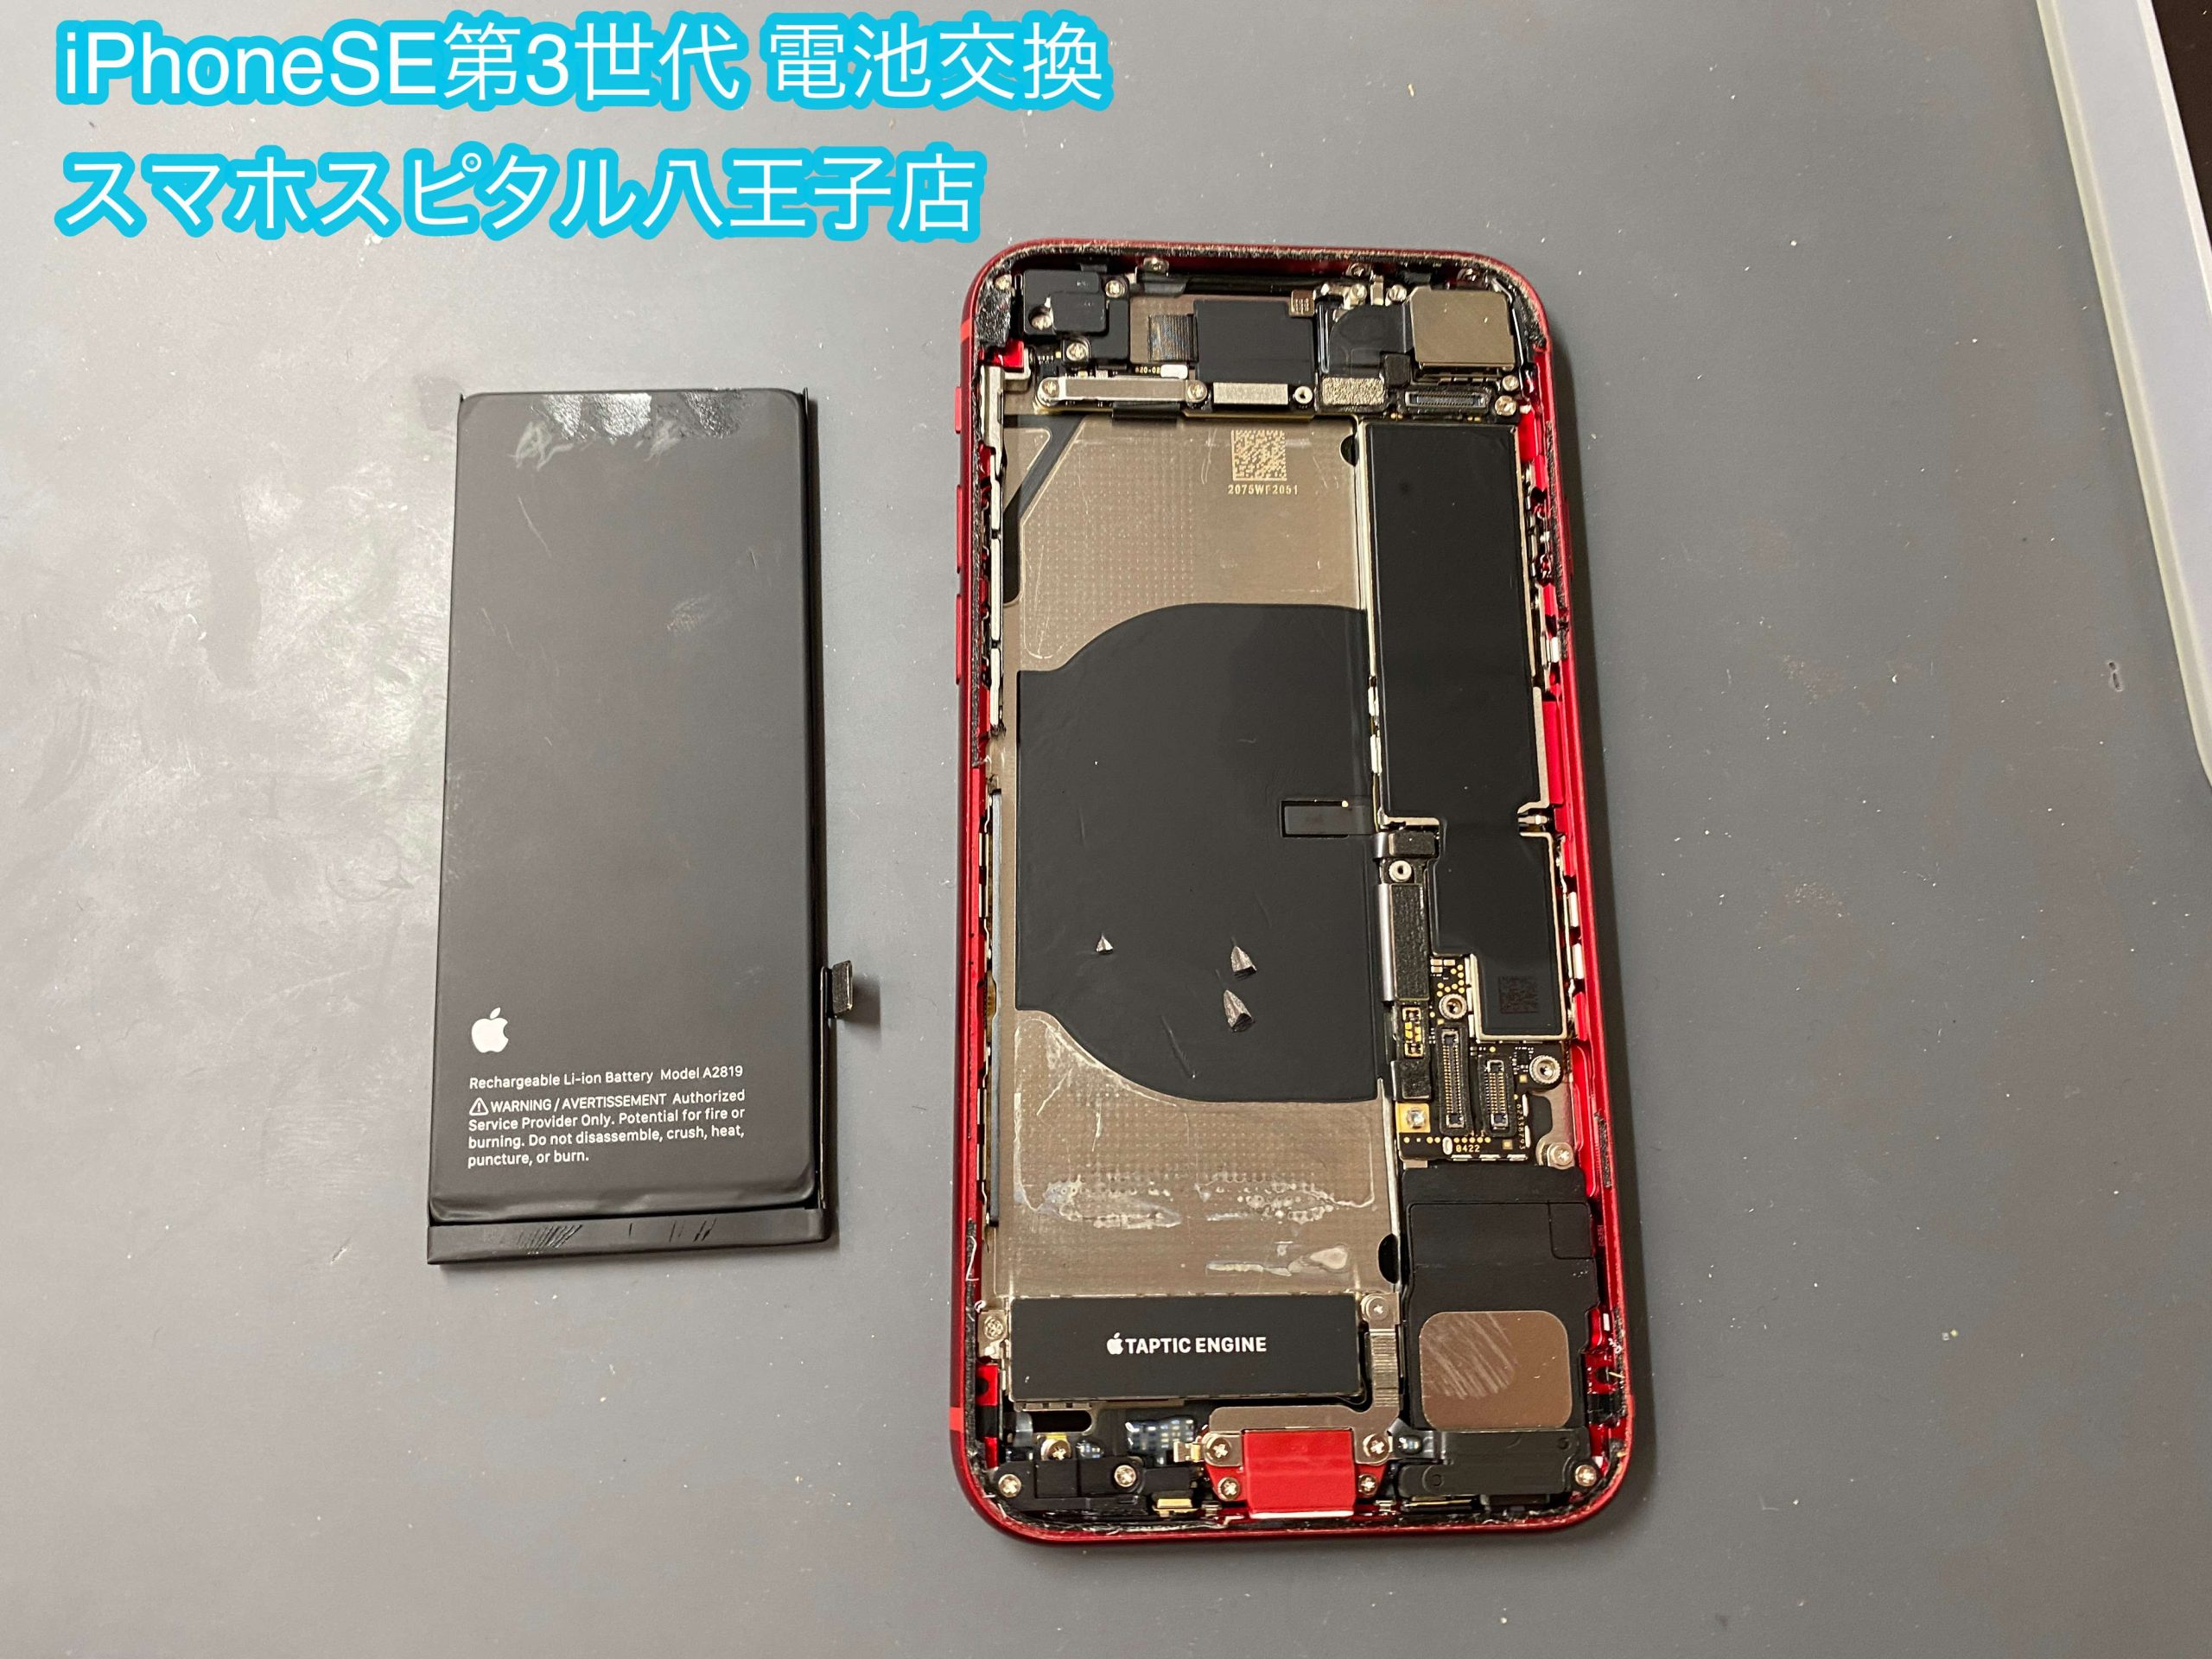 iPhoneSE 第3世代 バッテリー劣化により電池持ちが悪い！バッテリー 